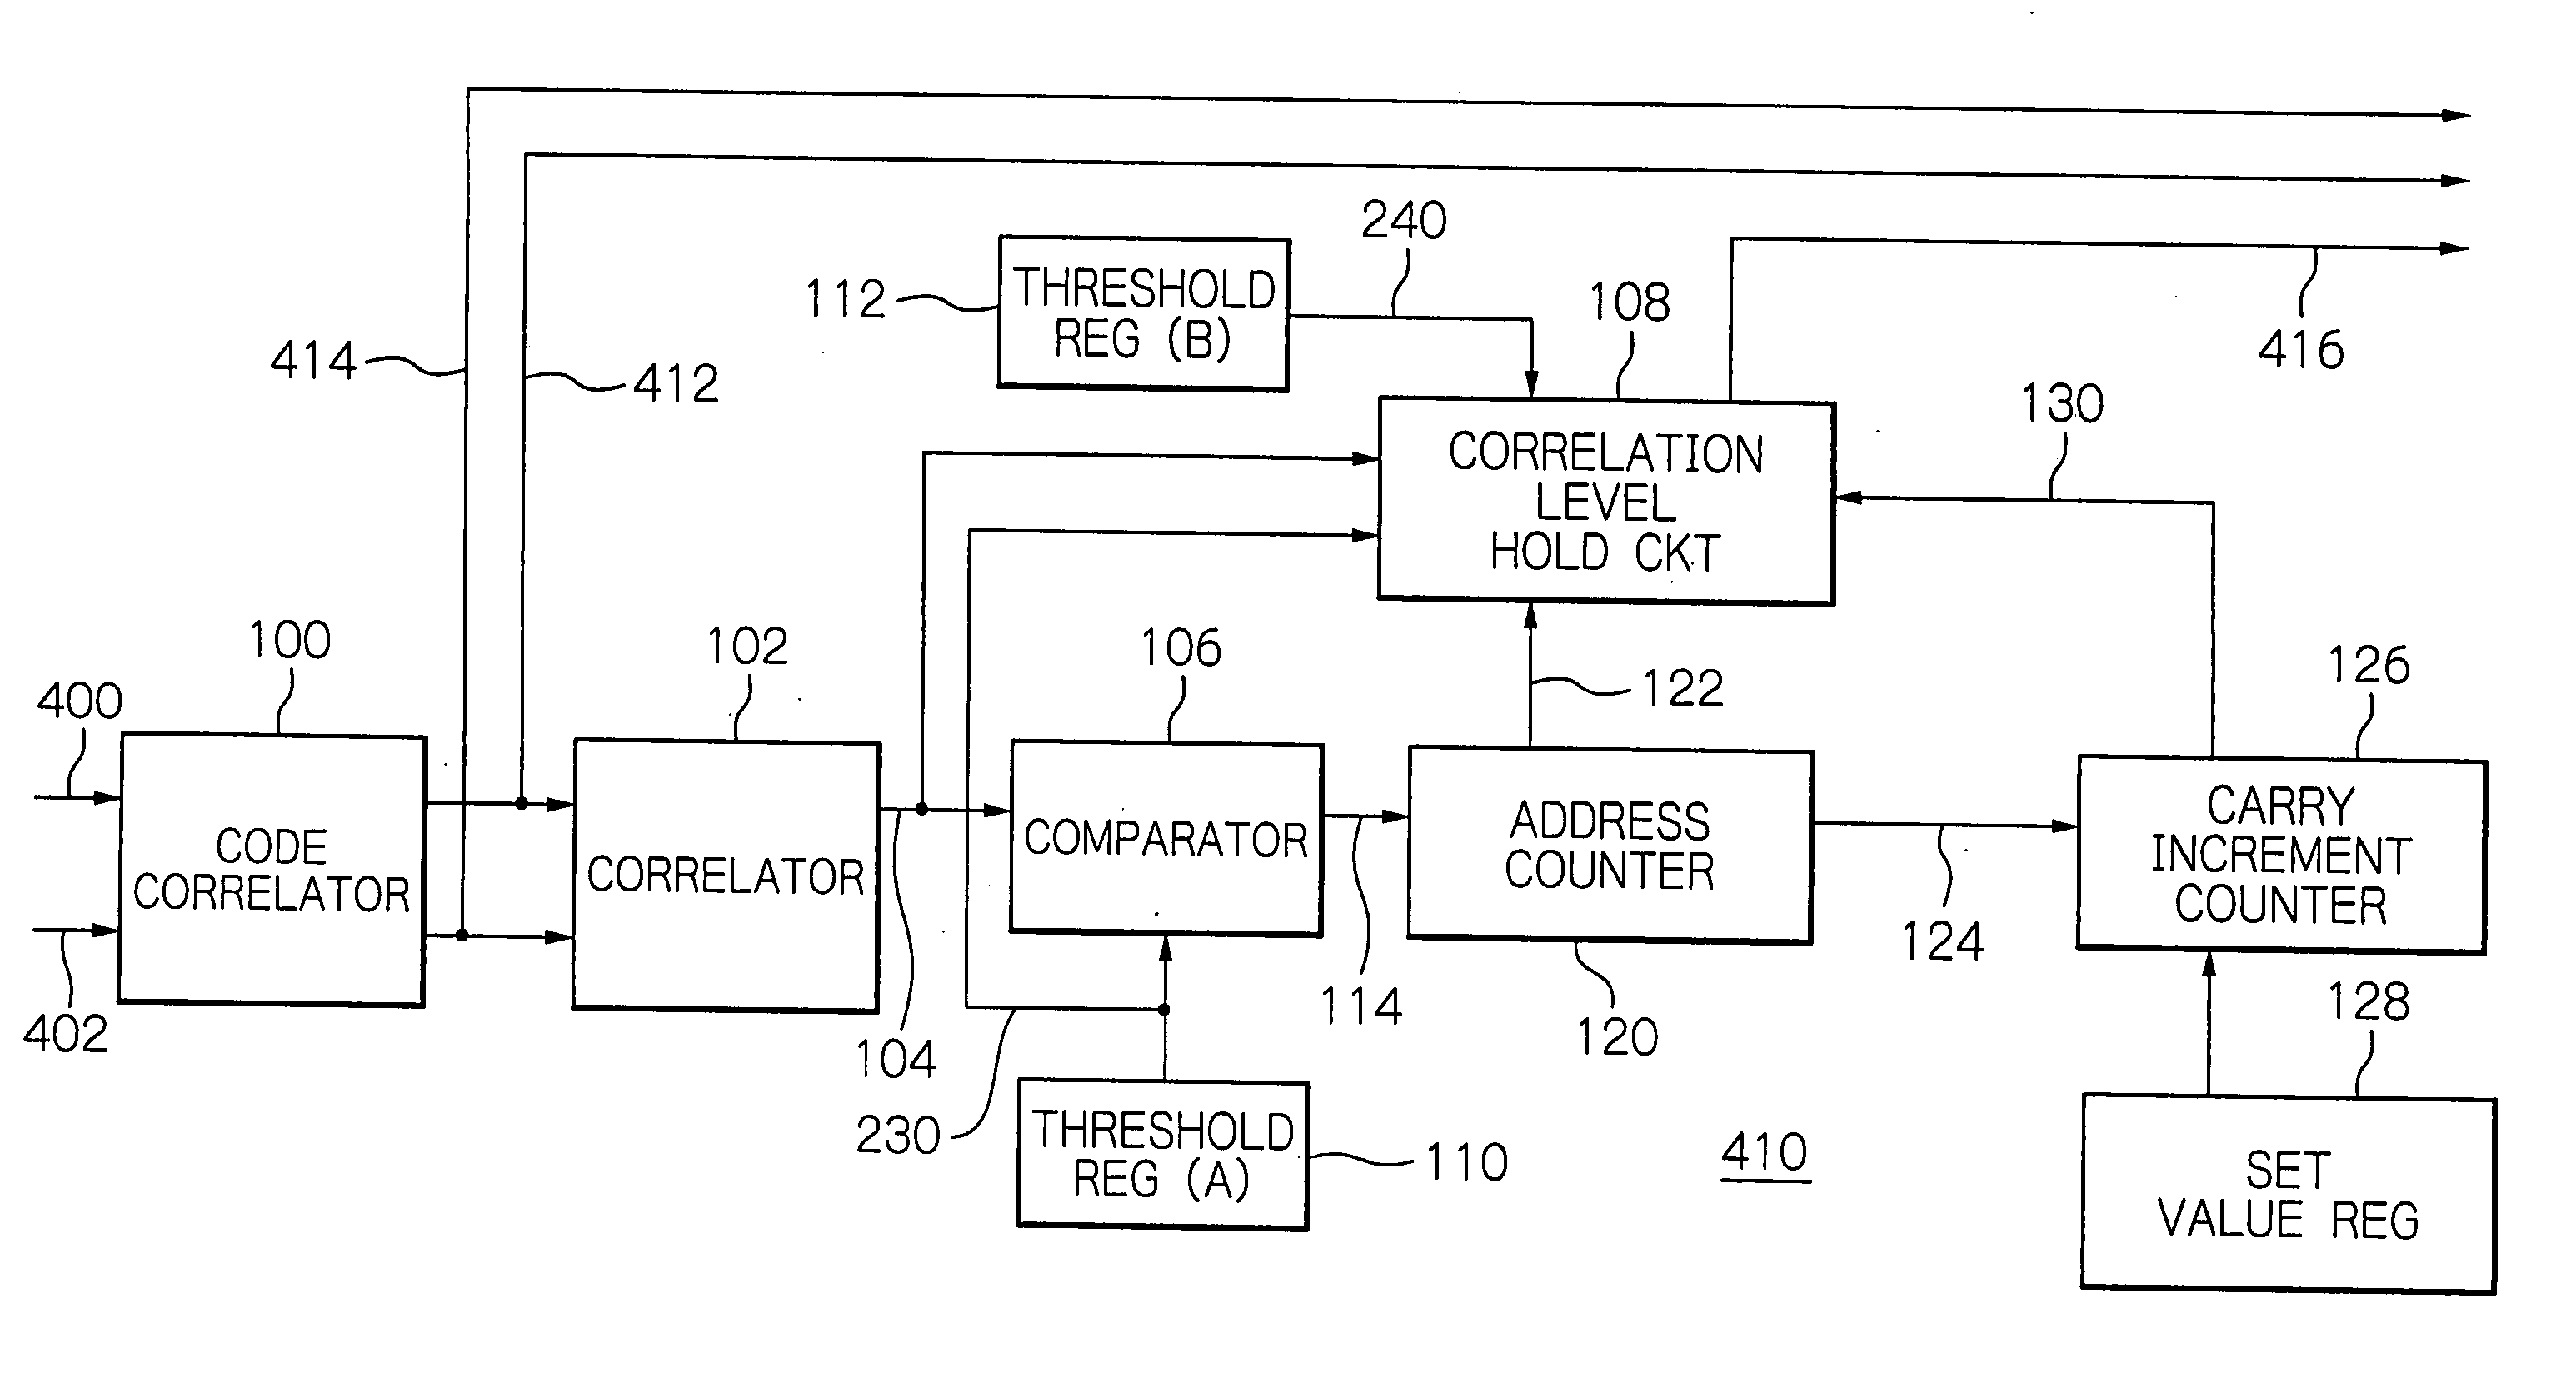 Synchronous control apparatus for initial synchronization when receiving a wireless signal